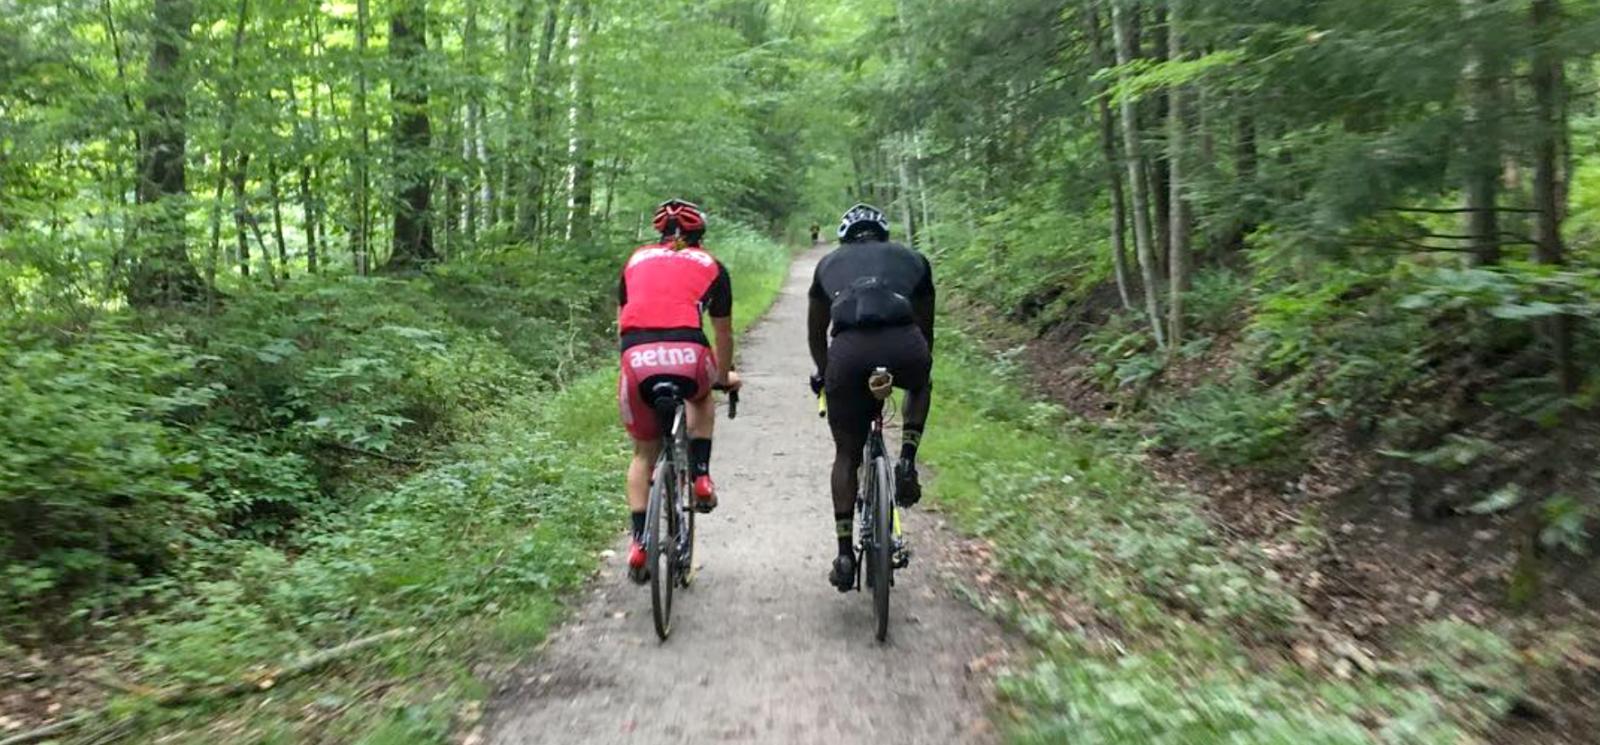 Two bicyclists riding down a path in the woods (Instagram@cyclesnack)